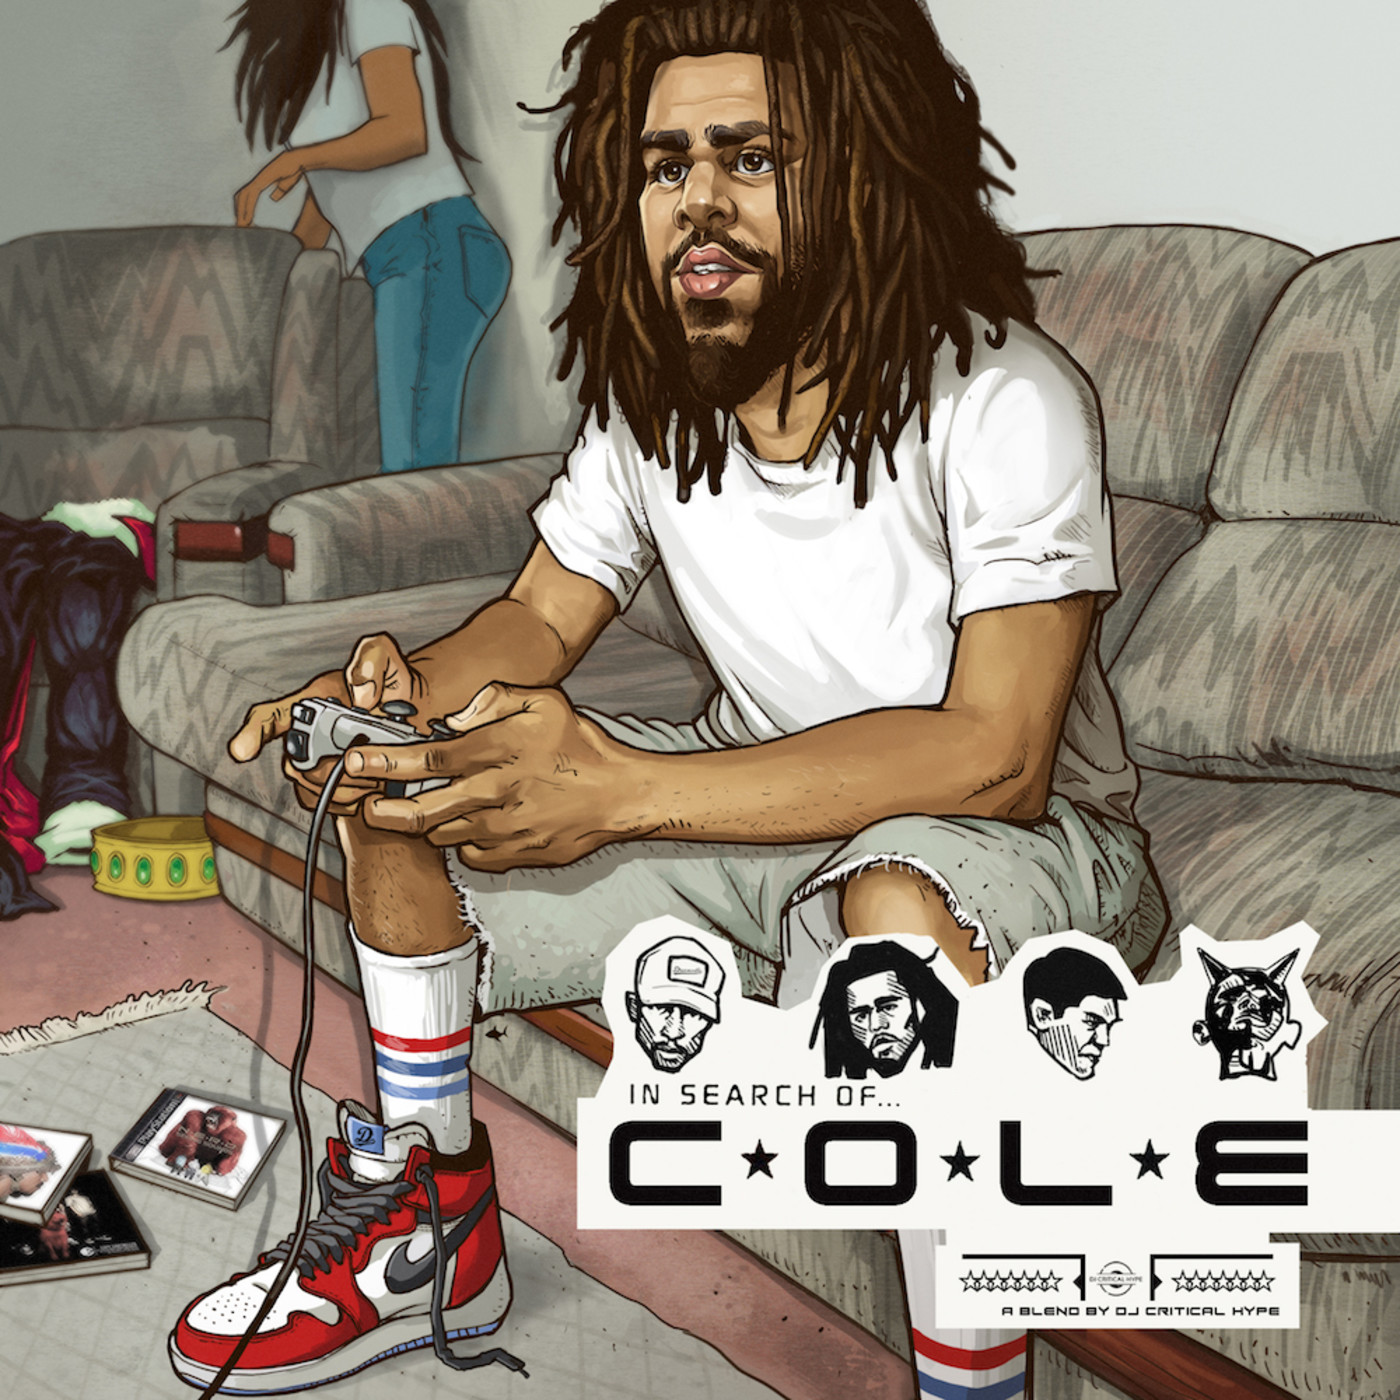 Listen To Dj Critical Hype New Mashup Mixtape In Search Of Cole Complex